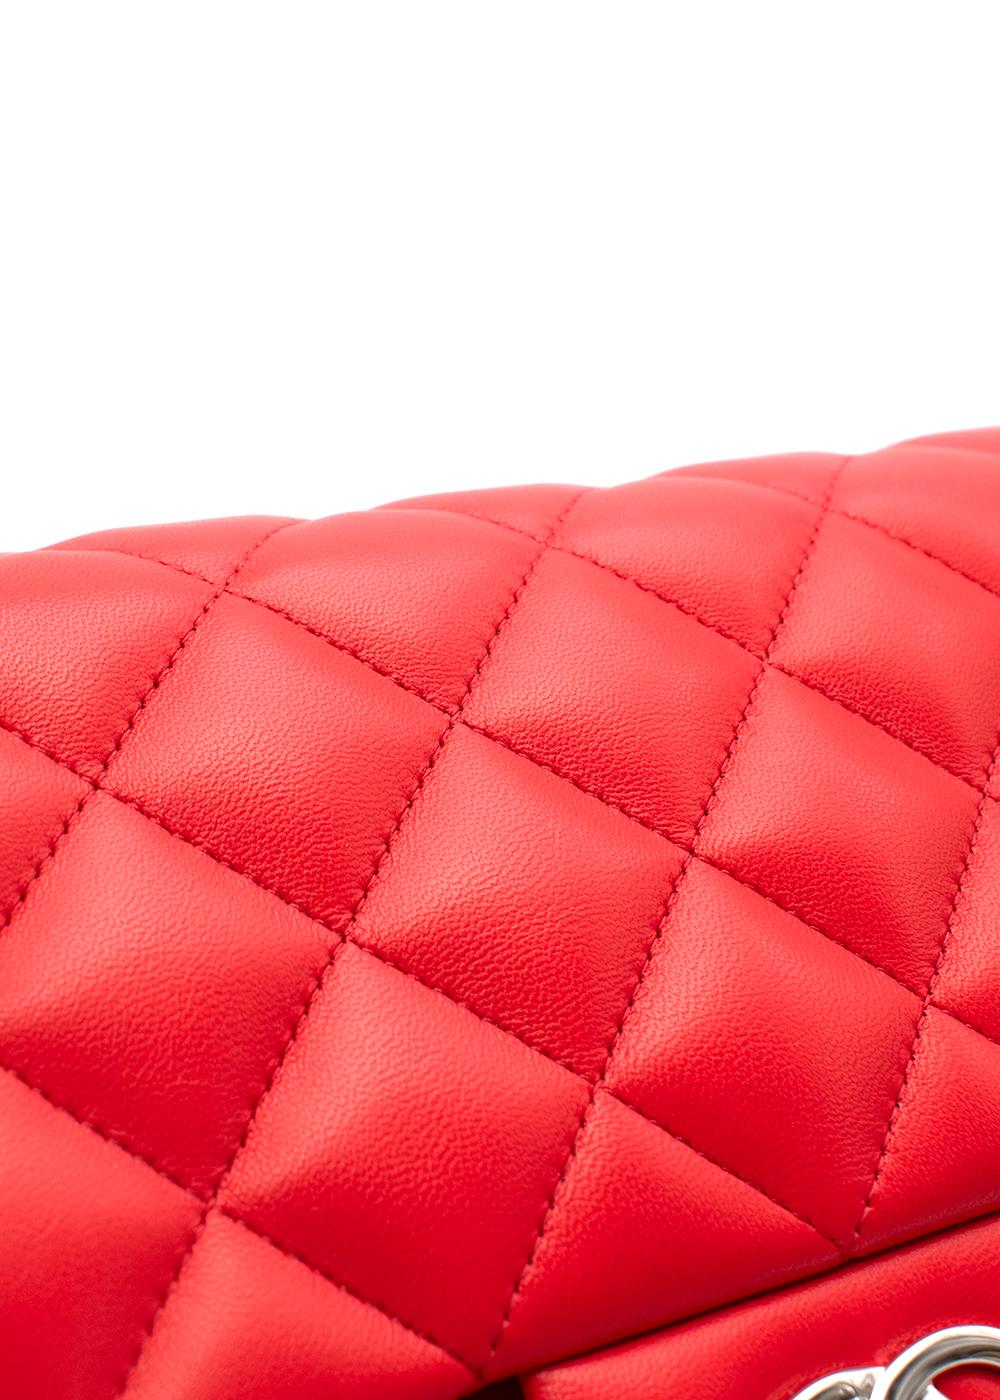 Chanel Red Quilted Leather Jumbo Double Flap Bag  For Sale 3